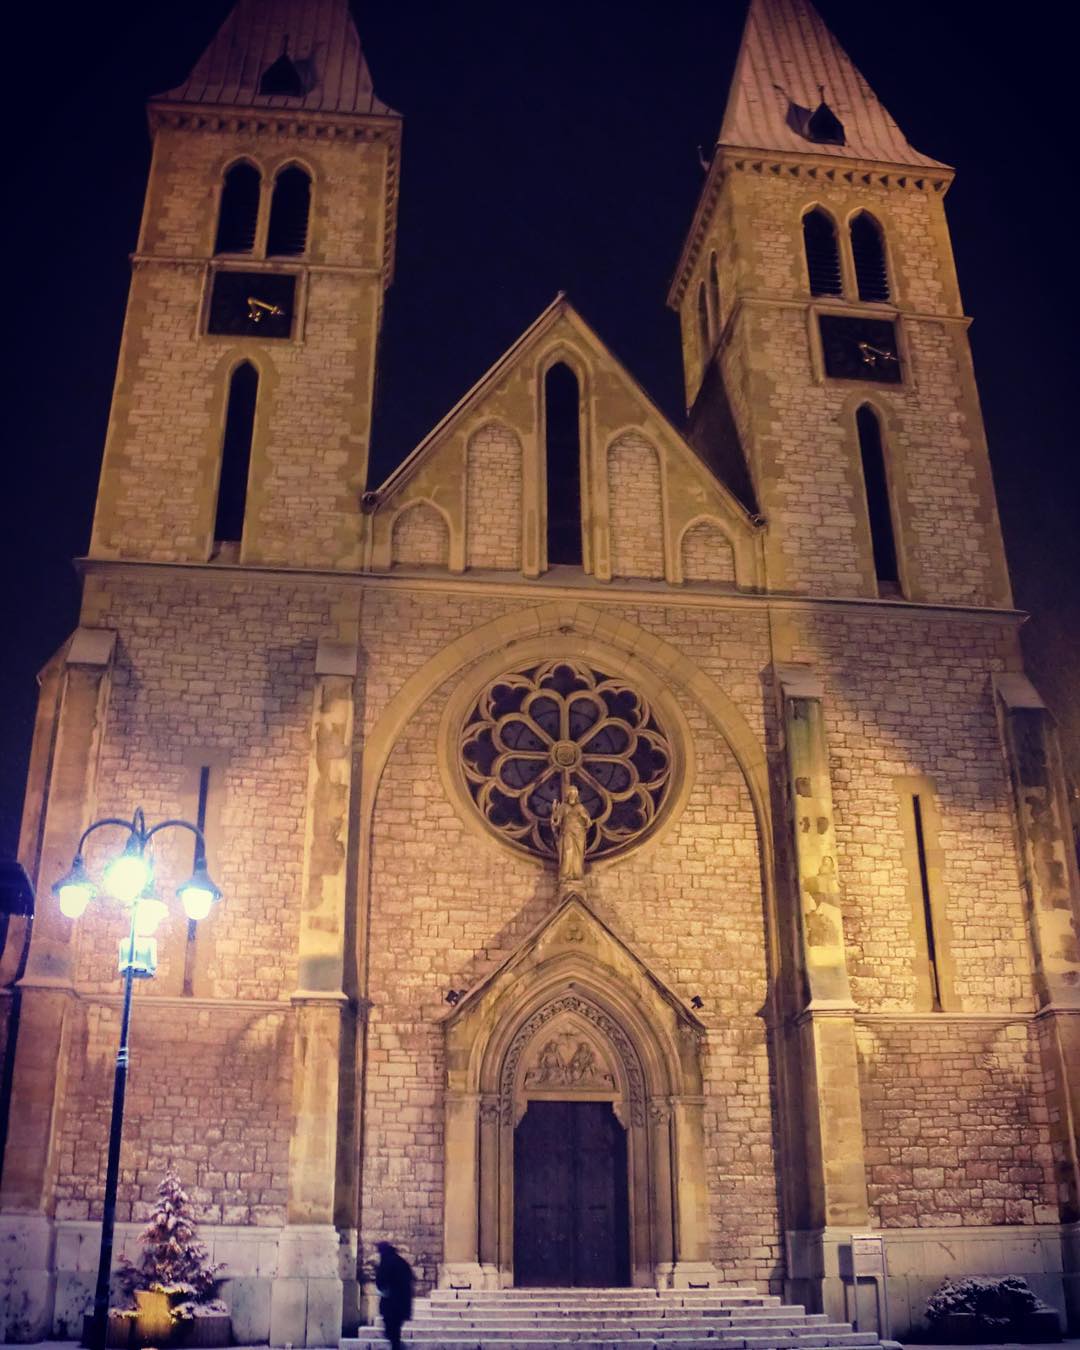 I was around the old town of Sarajevo with the snow when I saw the Sacred Heart Cathedral. A wonderful example of 19th century architecture. It is the biggest church in Bosnia and Herzegovina. I can’t explain, but there was something magic in that moment. I felt good and impressed to see it. Sarajevo is a cool city.